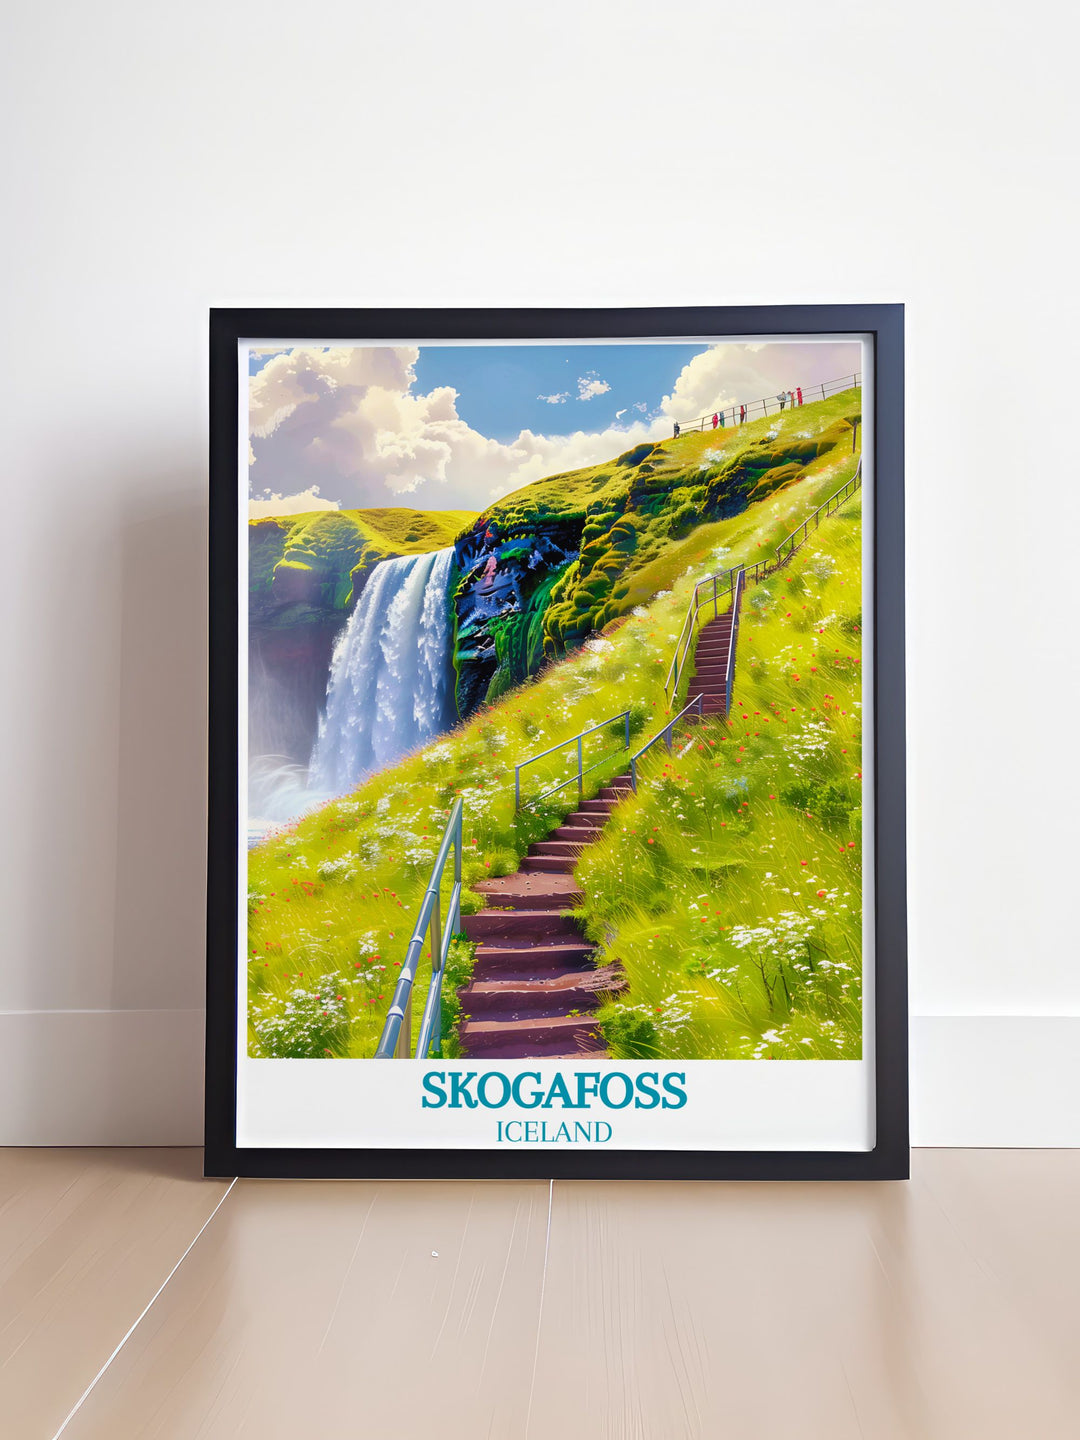 Immerse yourself in the breathtaking vistas of Skogafoss with this travel poster, featuring the dramatic waterfall and the adventurous trail that leads to the top.